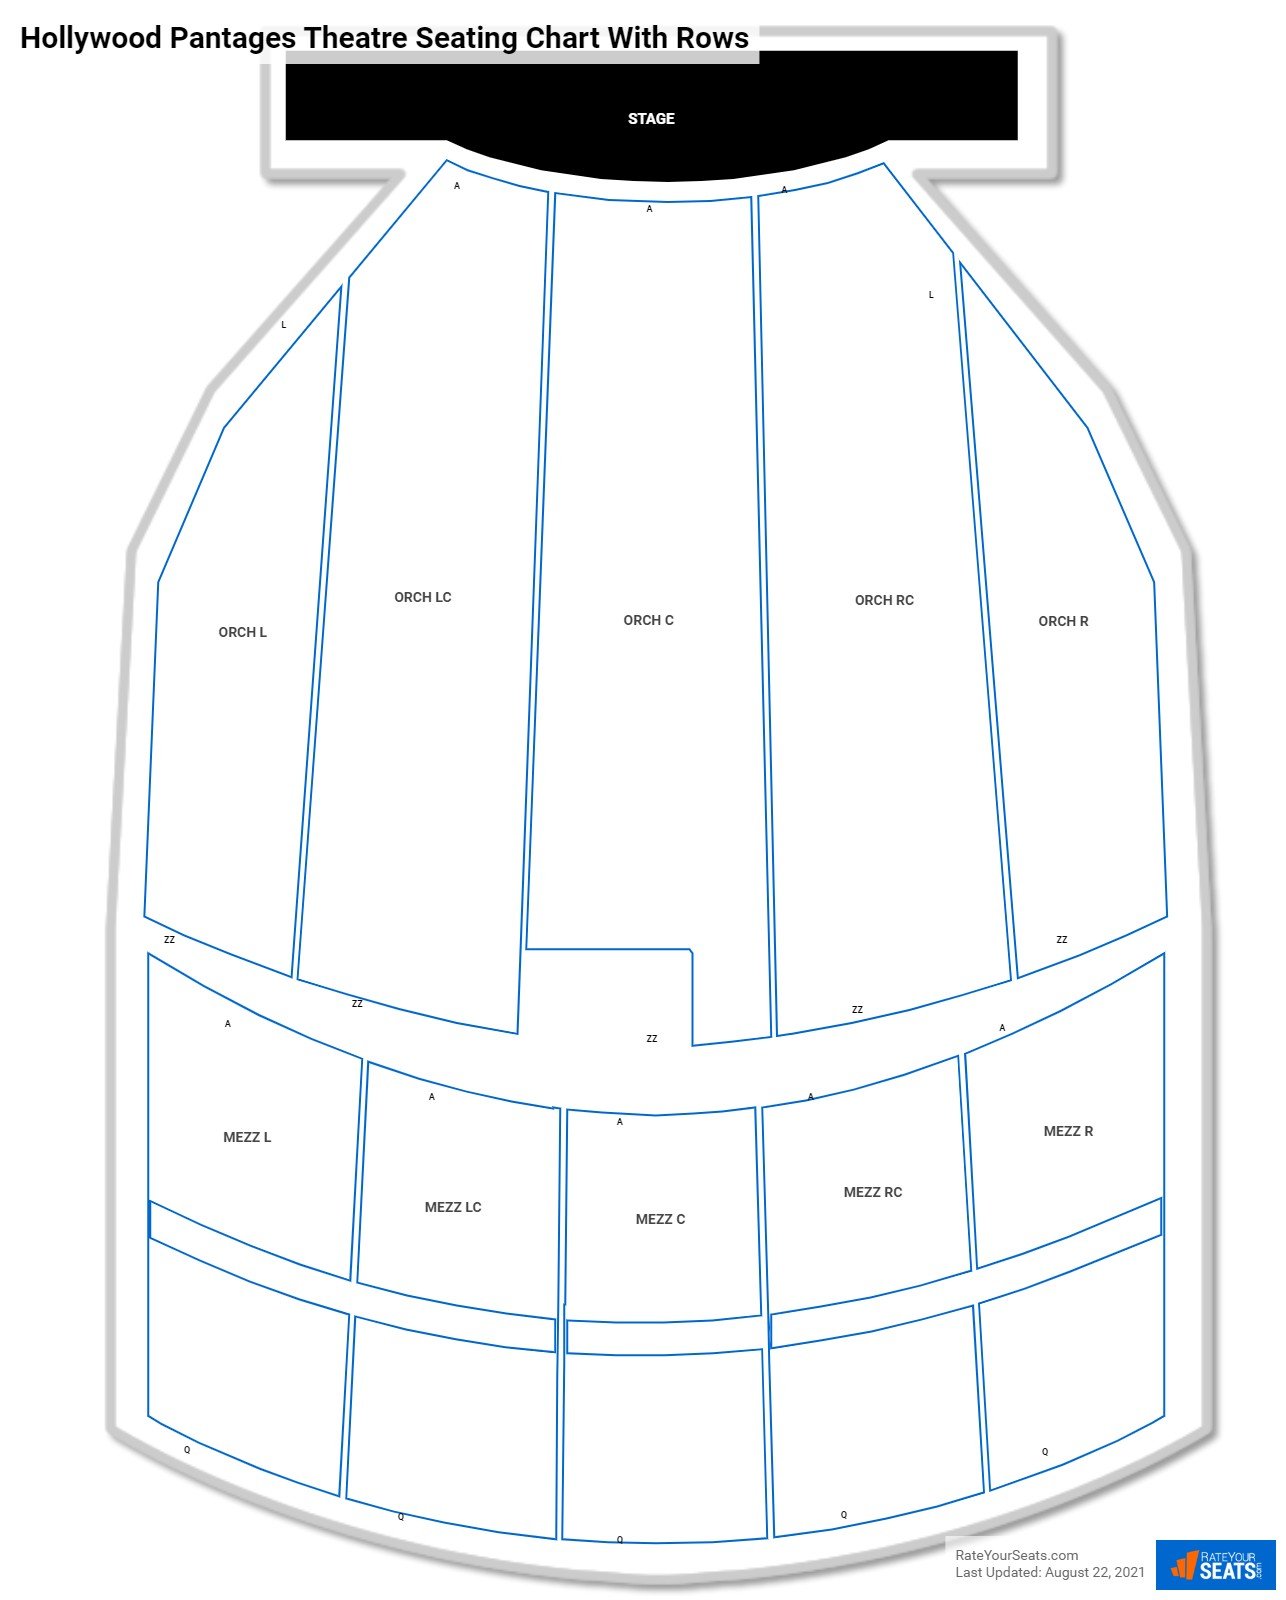 Hollywood Pantages Theatre seating chart with row numbers